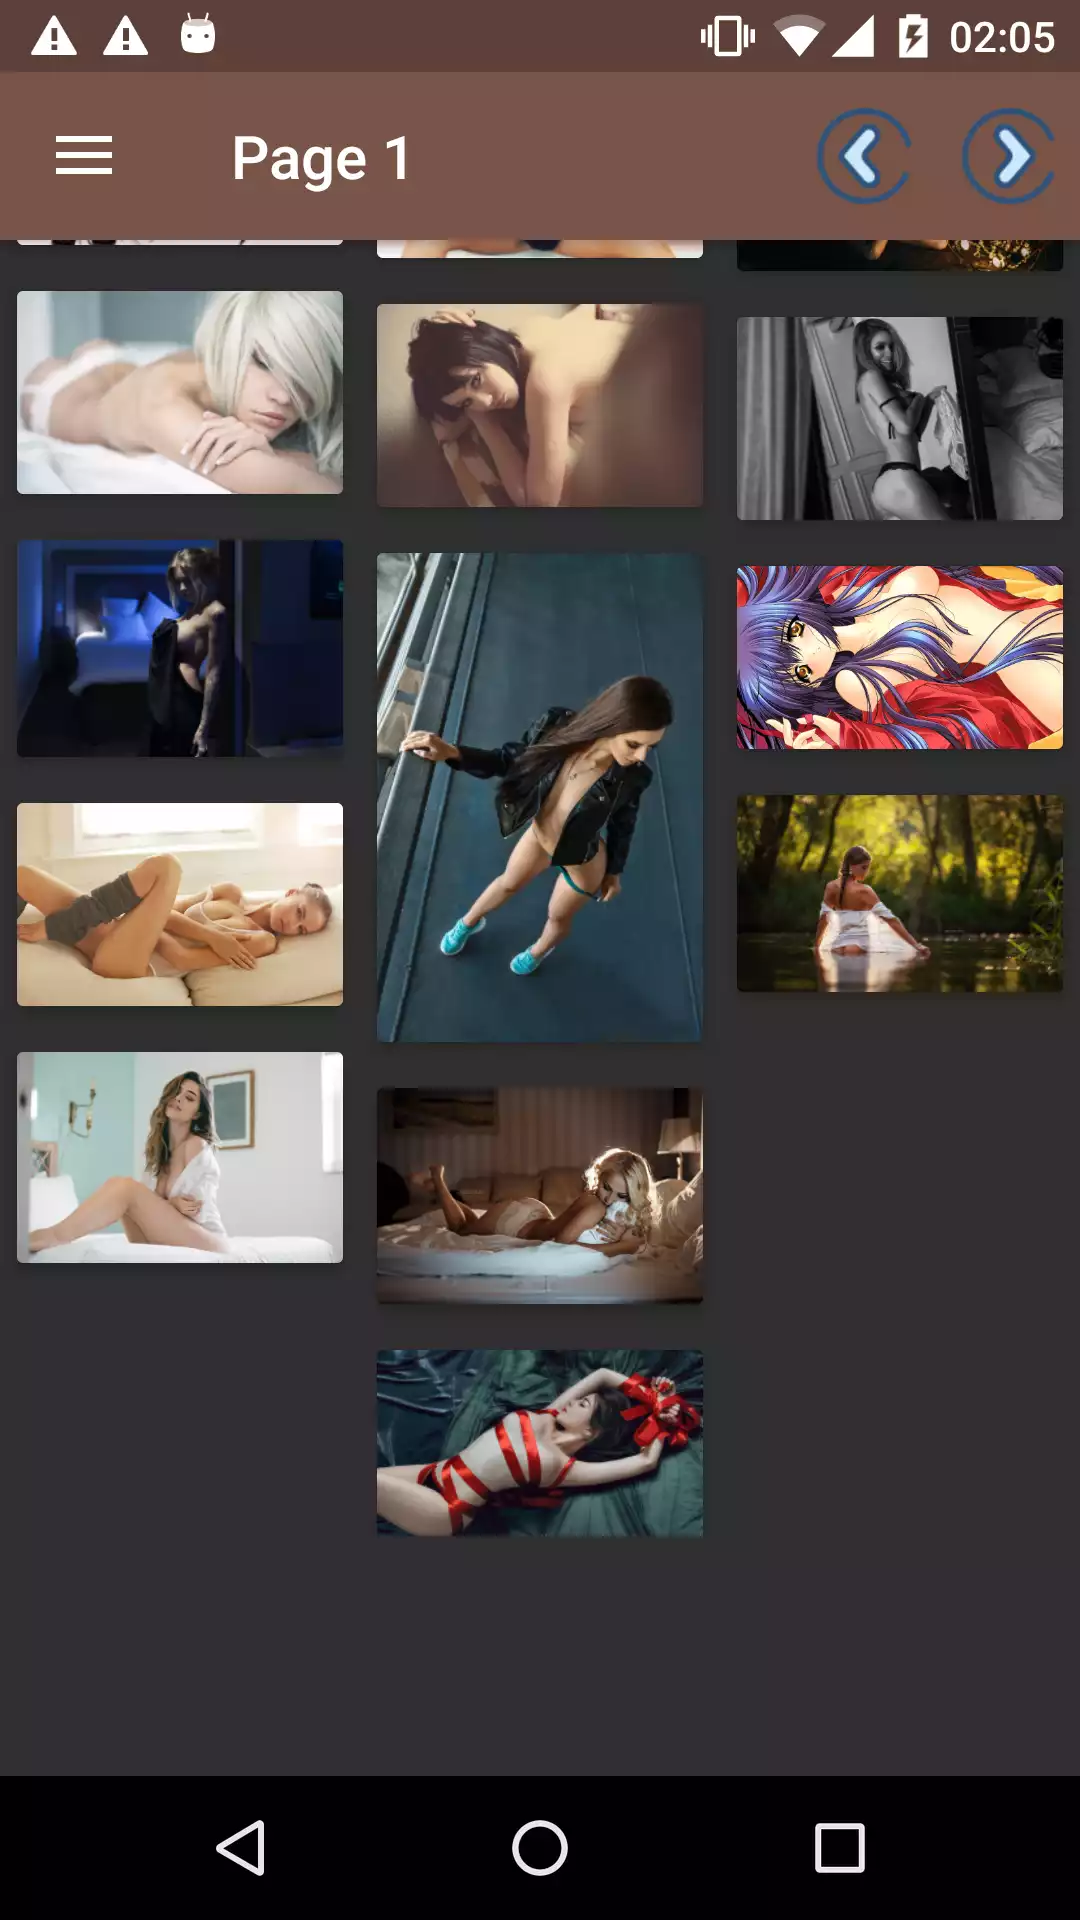 Strategic Covering adult,photos,for,pictures,anime,hentai,sexy,porn,download,offline,android,photo,apk,apps,futanari,wallpapers,galleries,cuckold,watching,app,excuses,backgrounds,star,pron